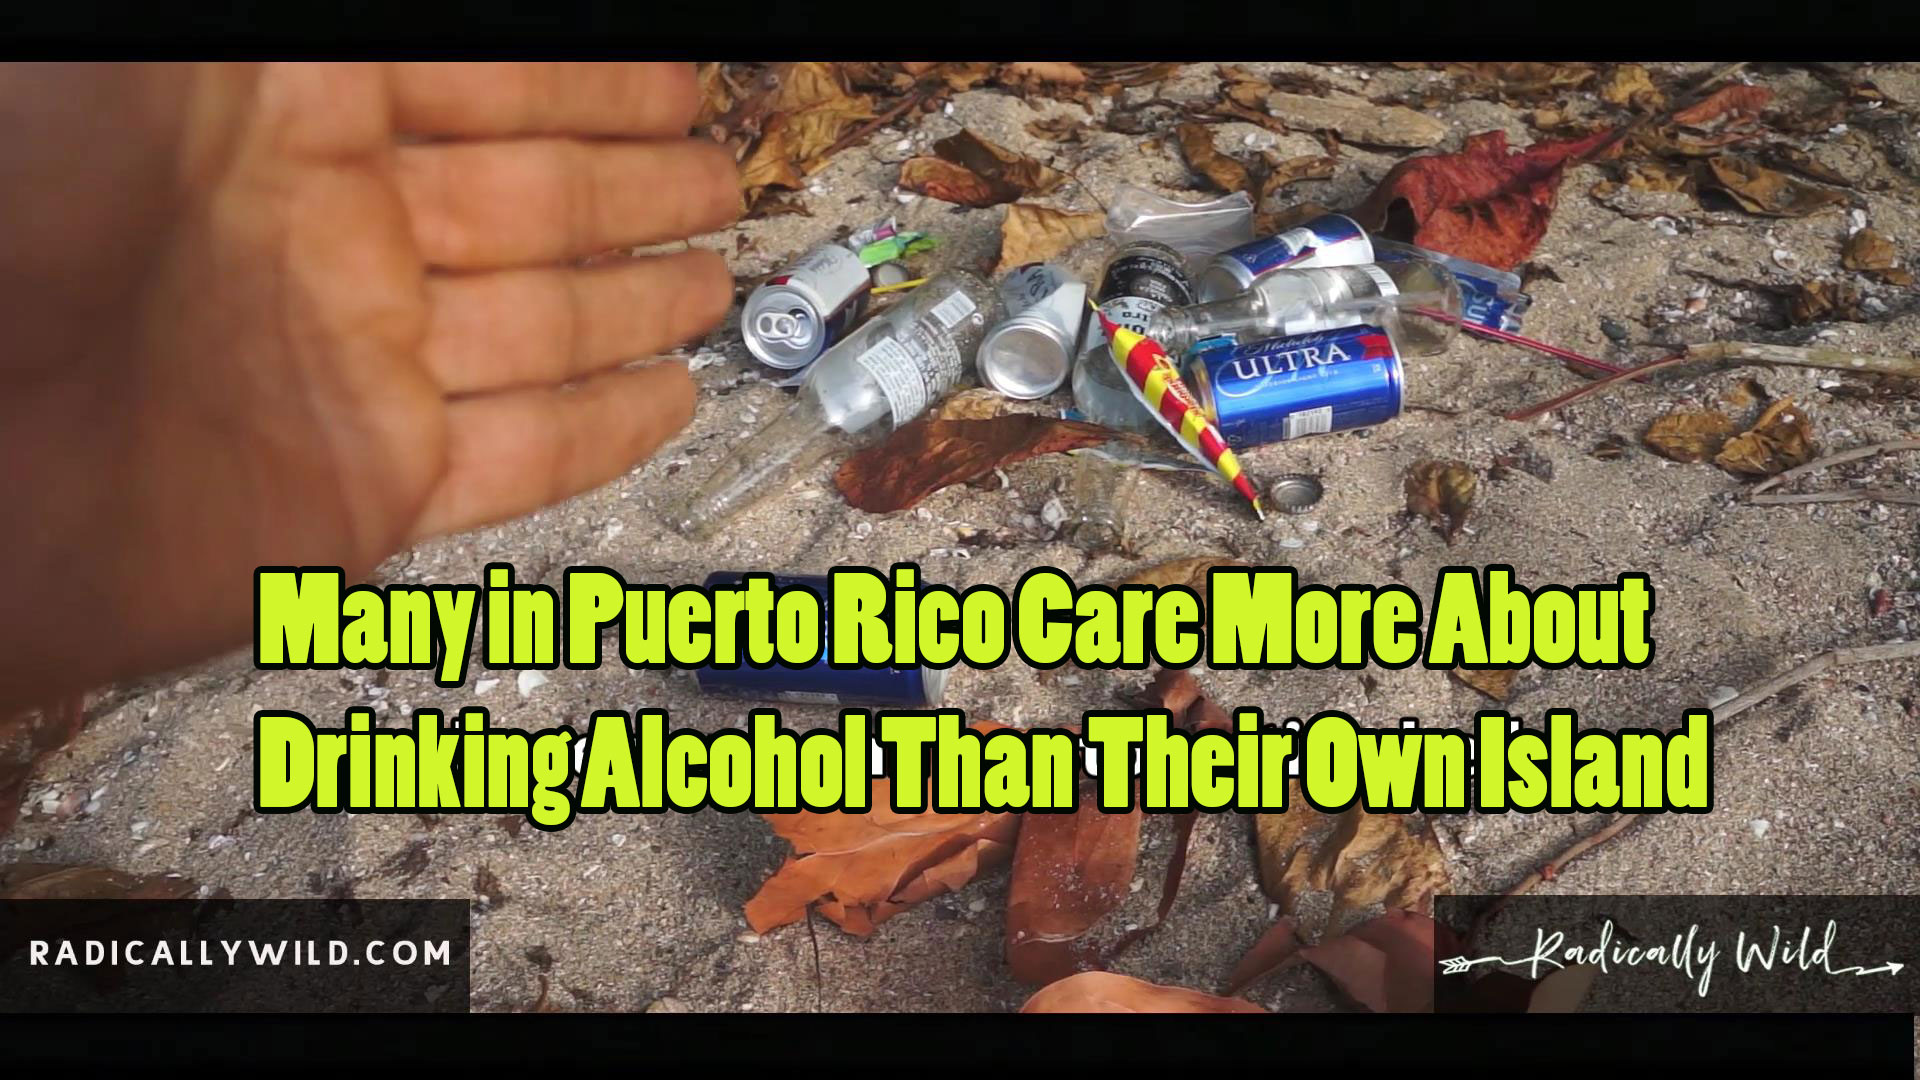 puerto rico care about drinking alcohol